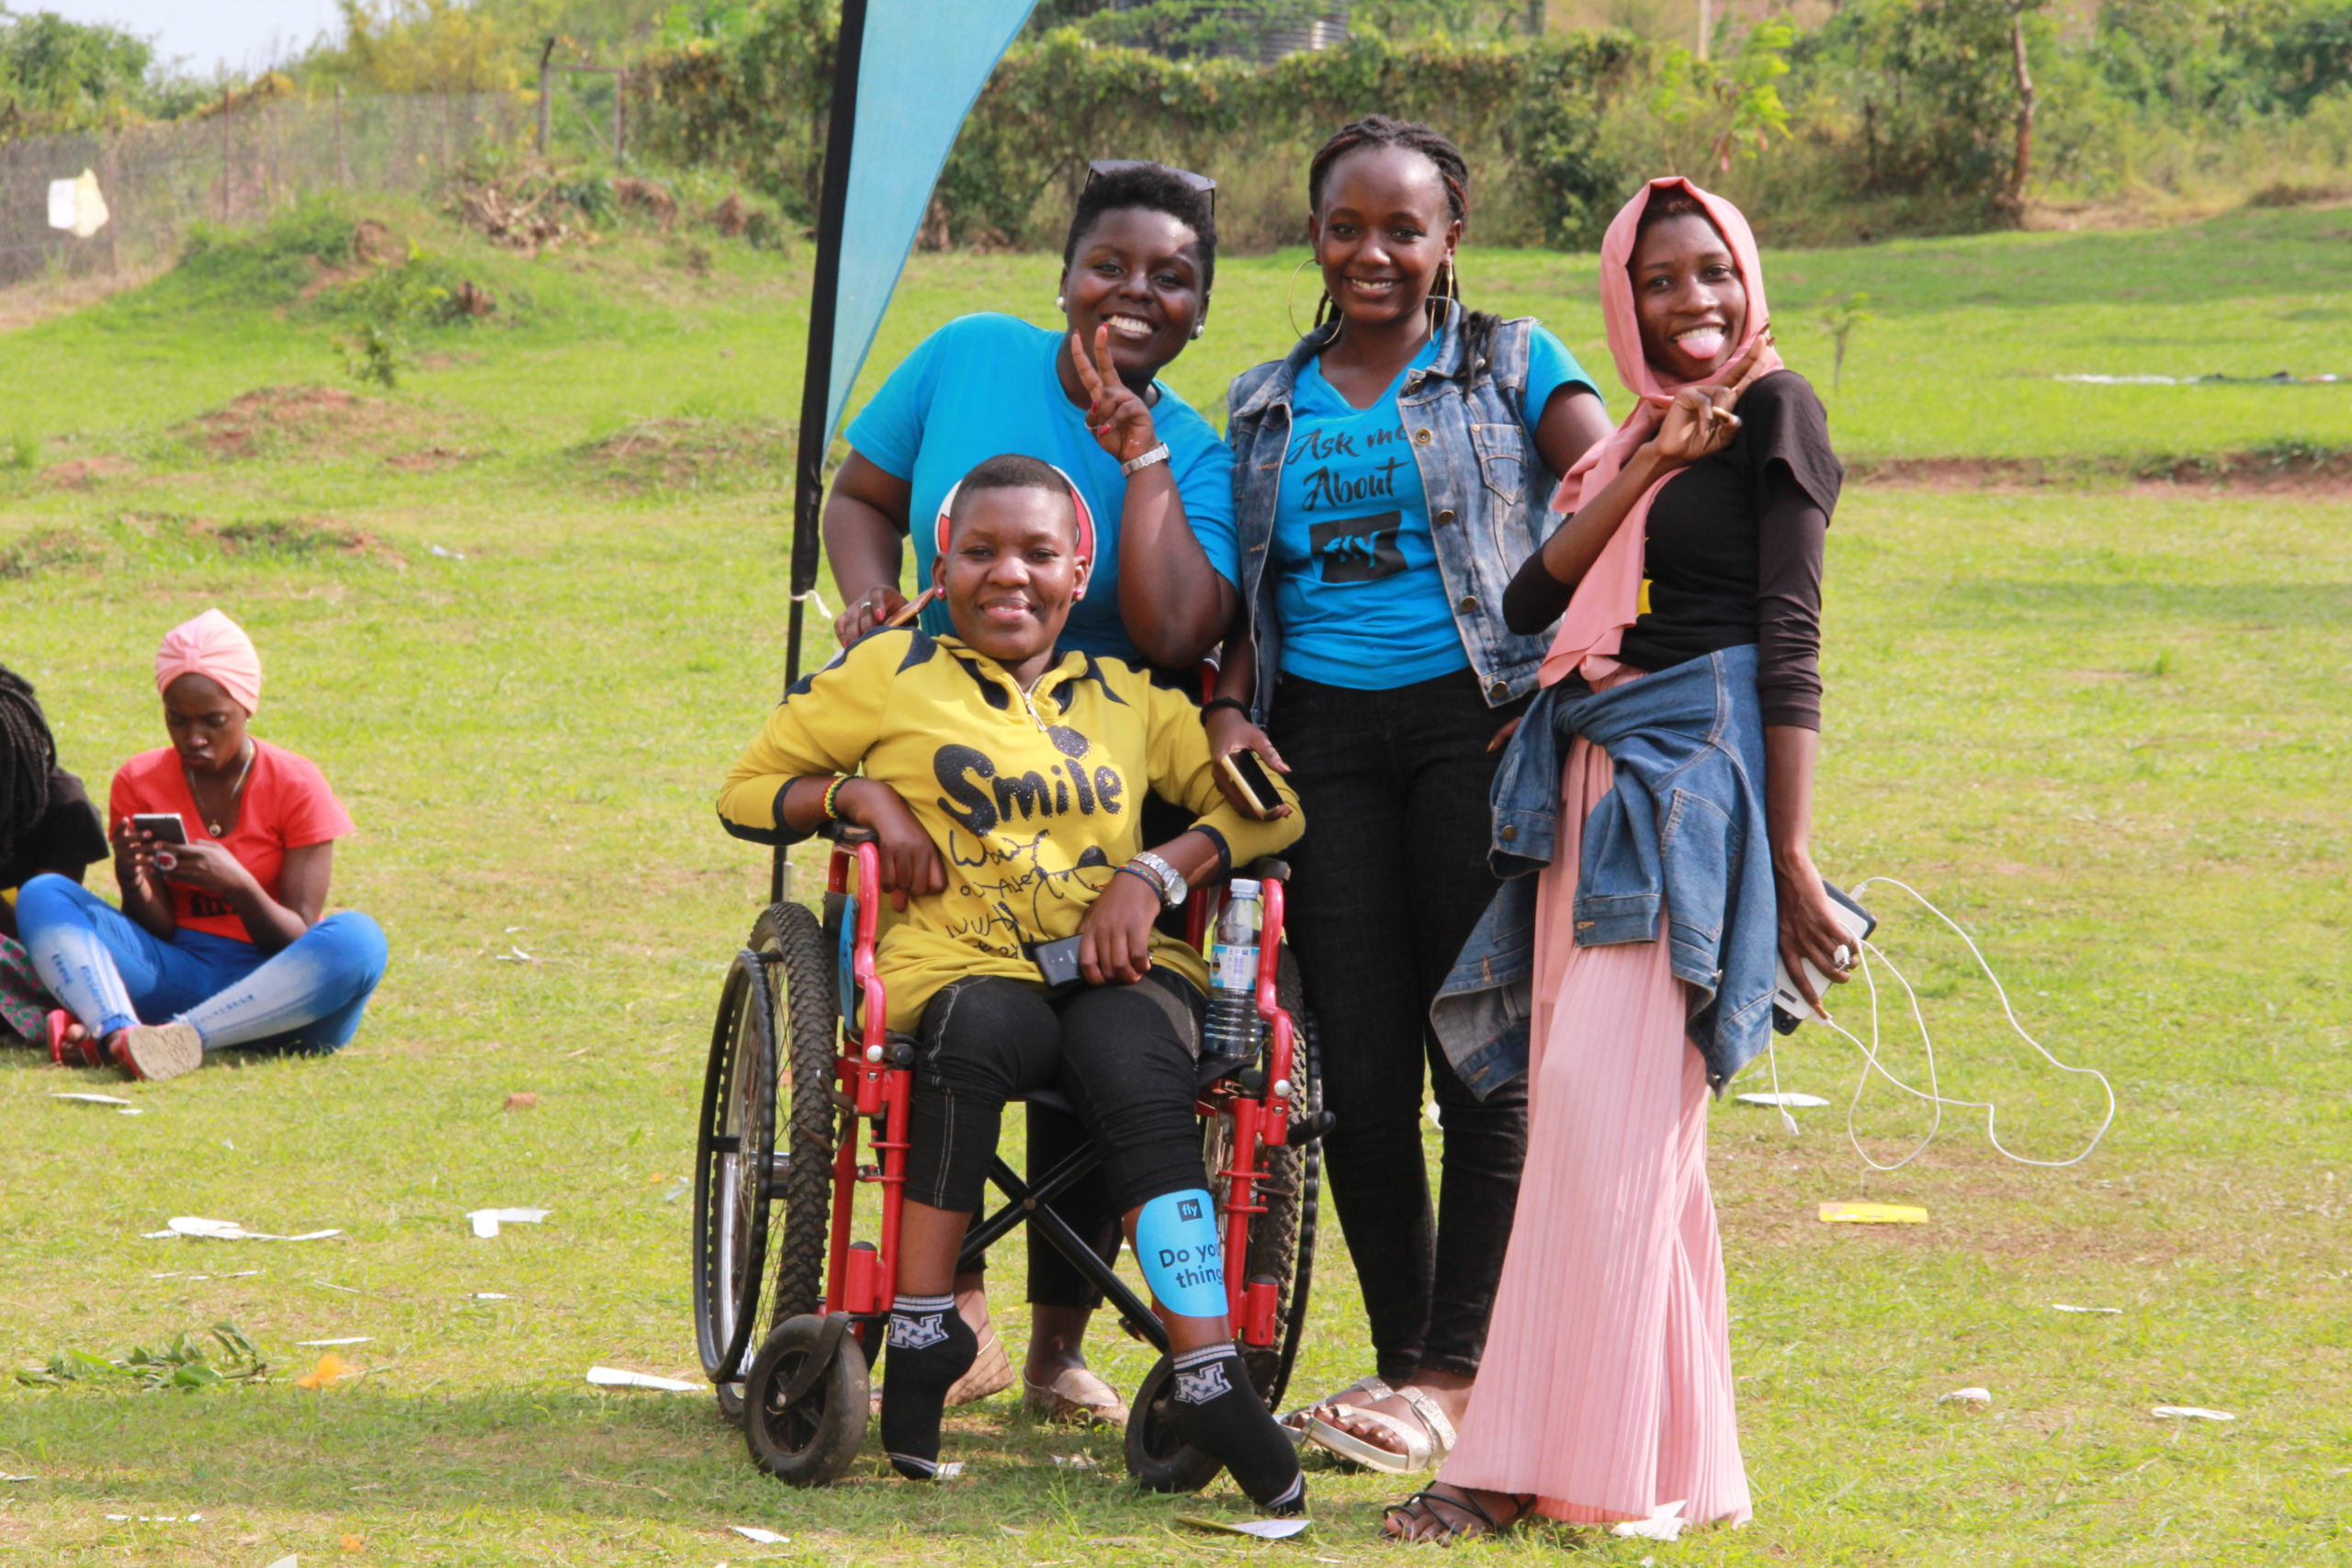 How Can We Support Persons With Disabilities in Uganda?